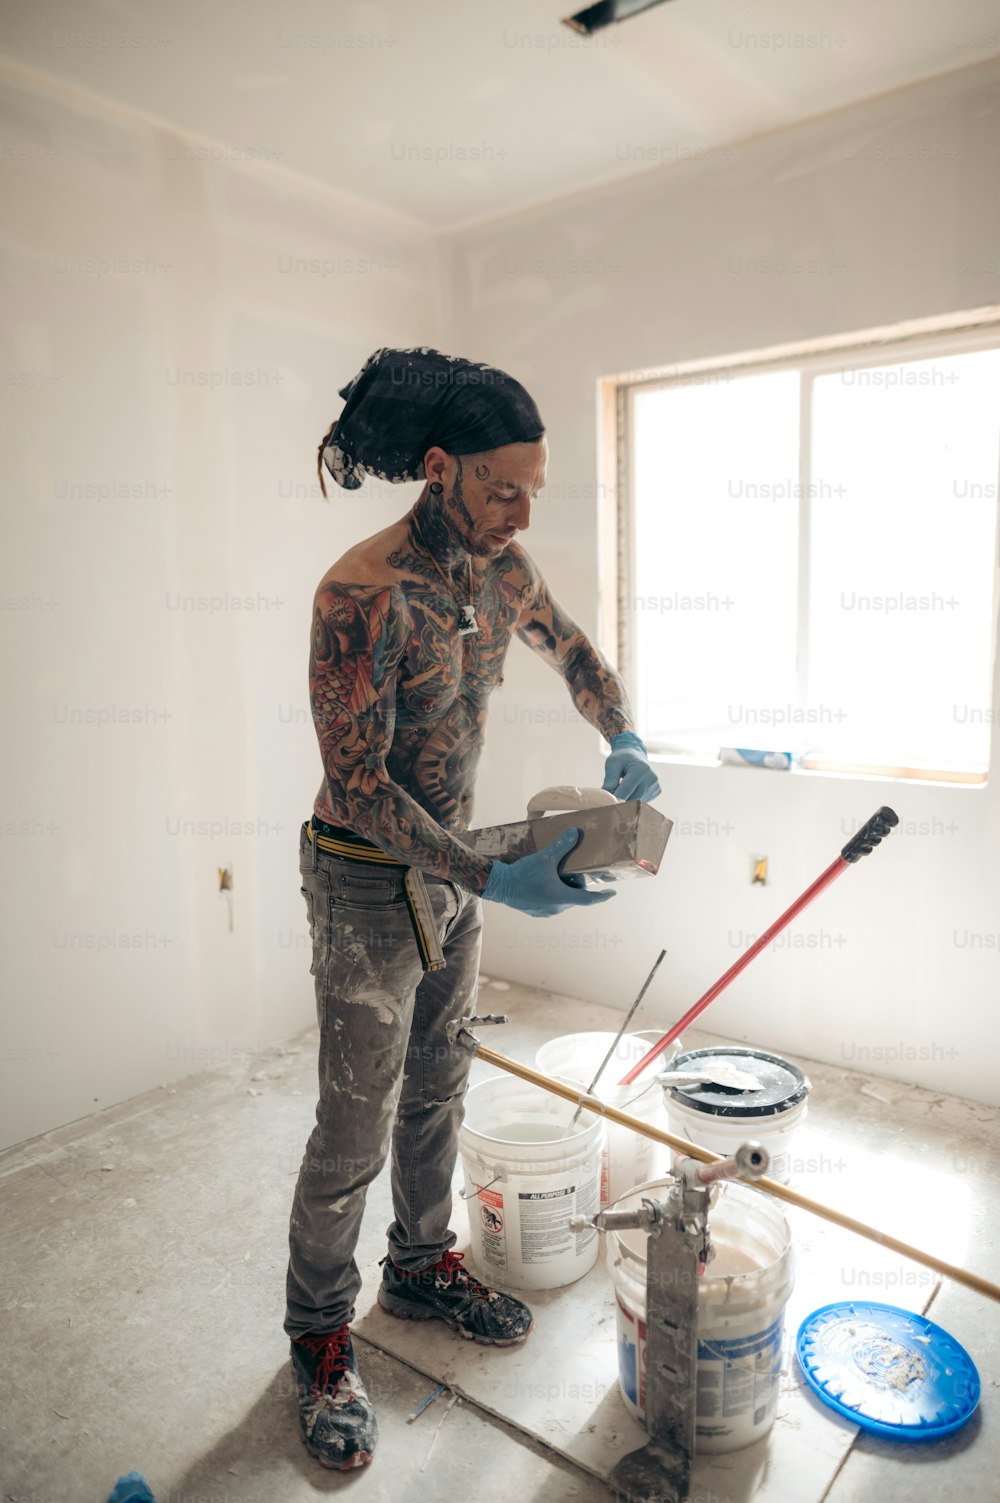 a man with tattoos is painting a wall